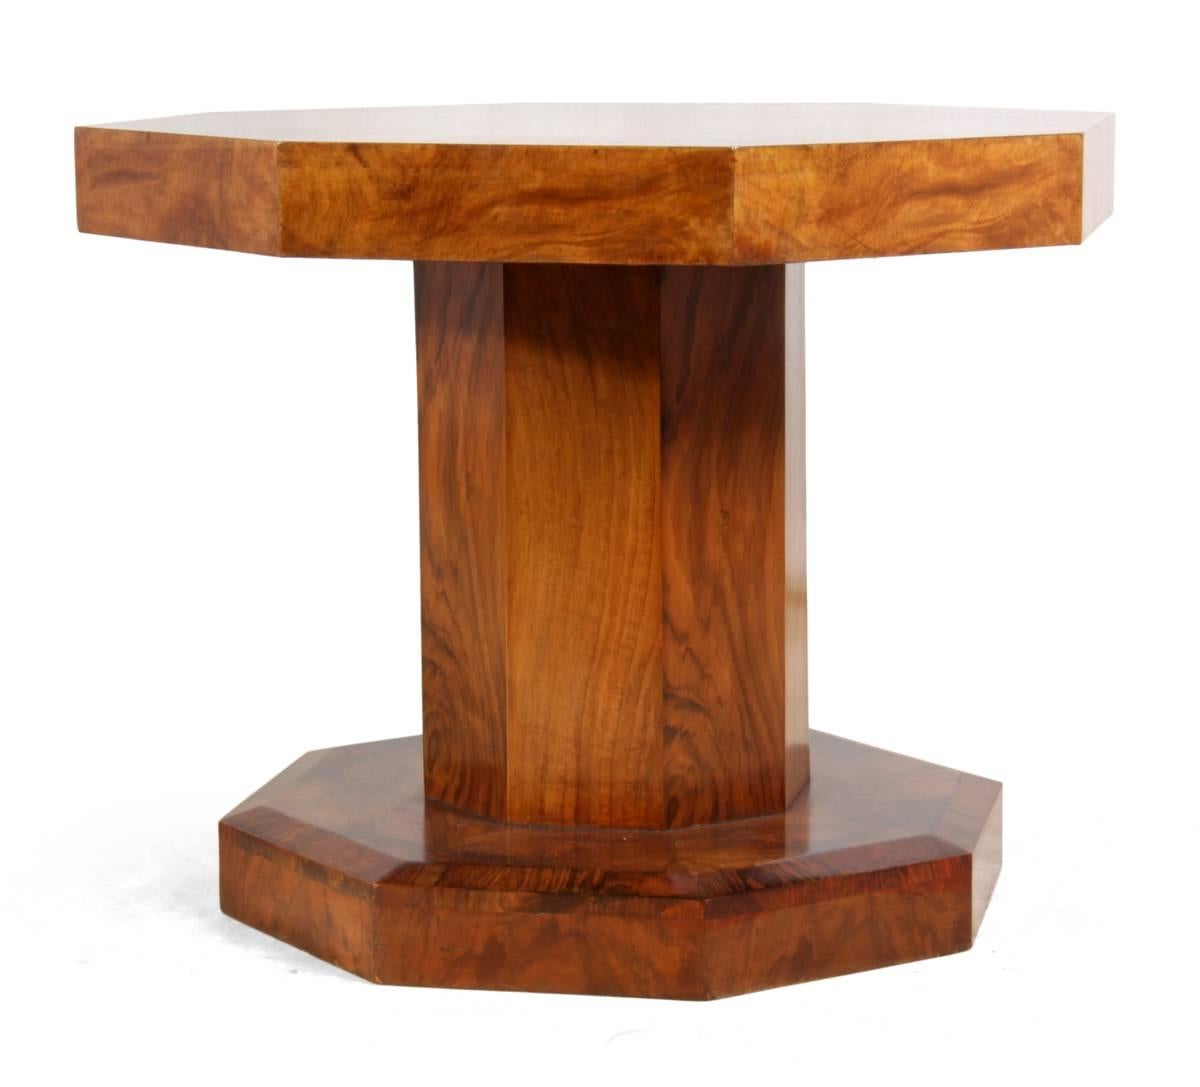 Art Deco walnut coffee table
An octagonal Art Deco coffee table in walnut with segmented top. This table is in very good condition and has been recently French polished
Age: 1930
Style: Art Deco
Material: Walnut
Condition: Very